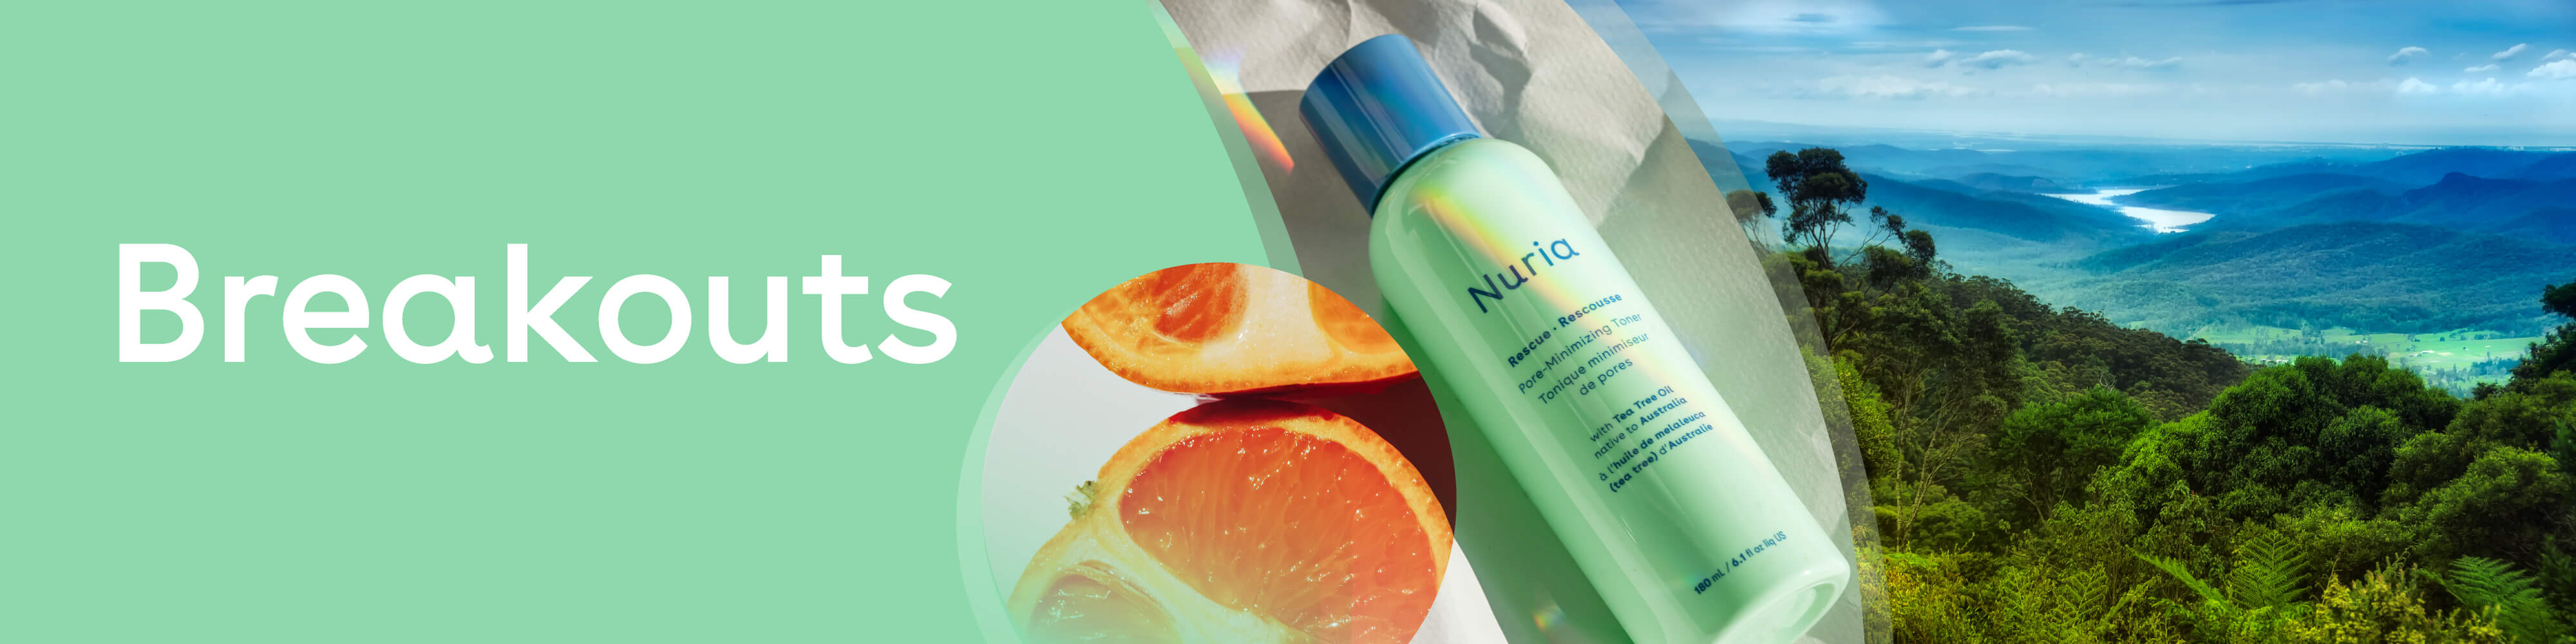 Breakouts - Nuria's products for your skin concerns